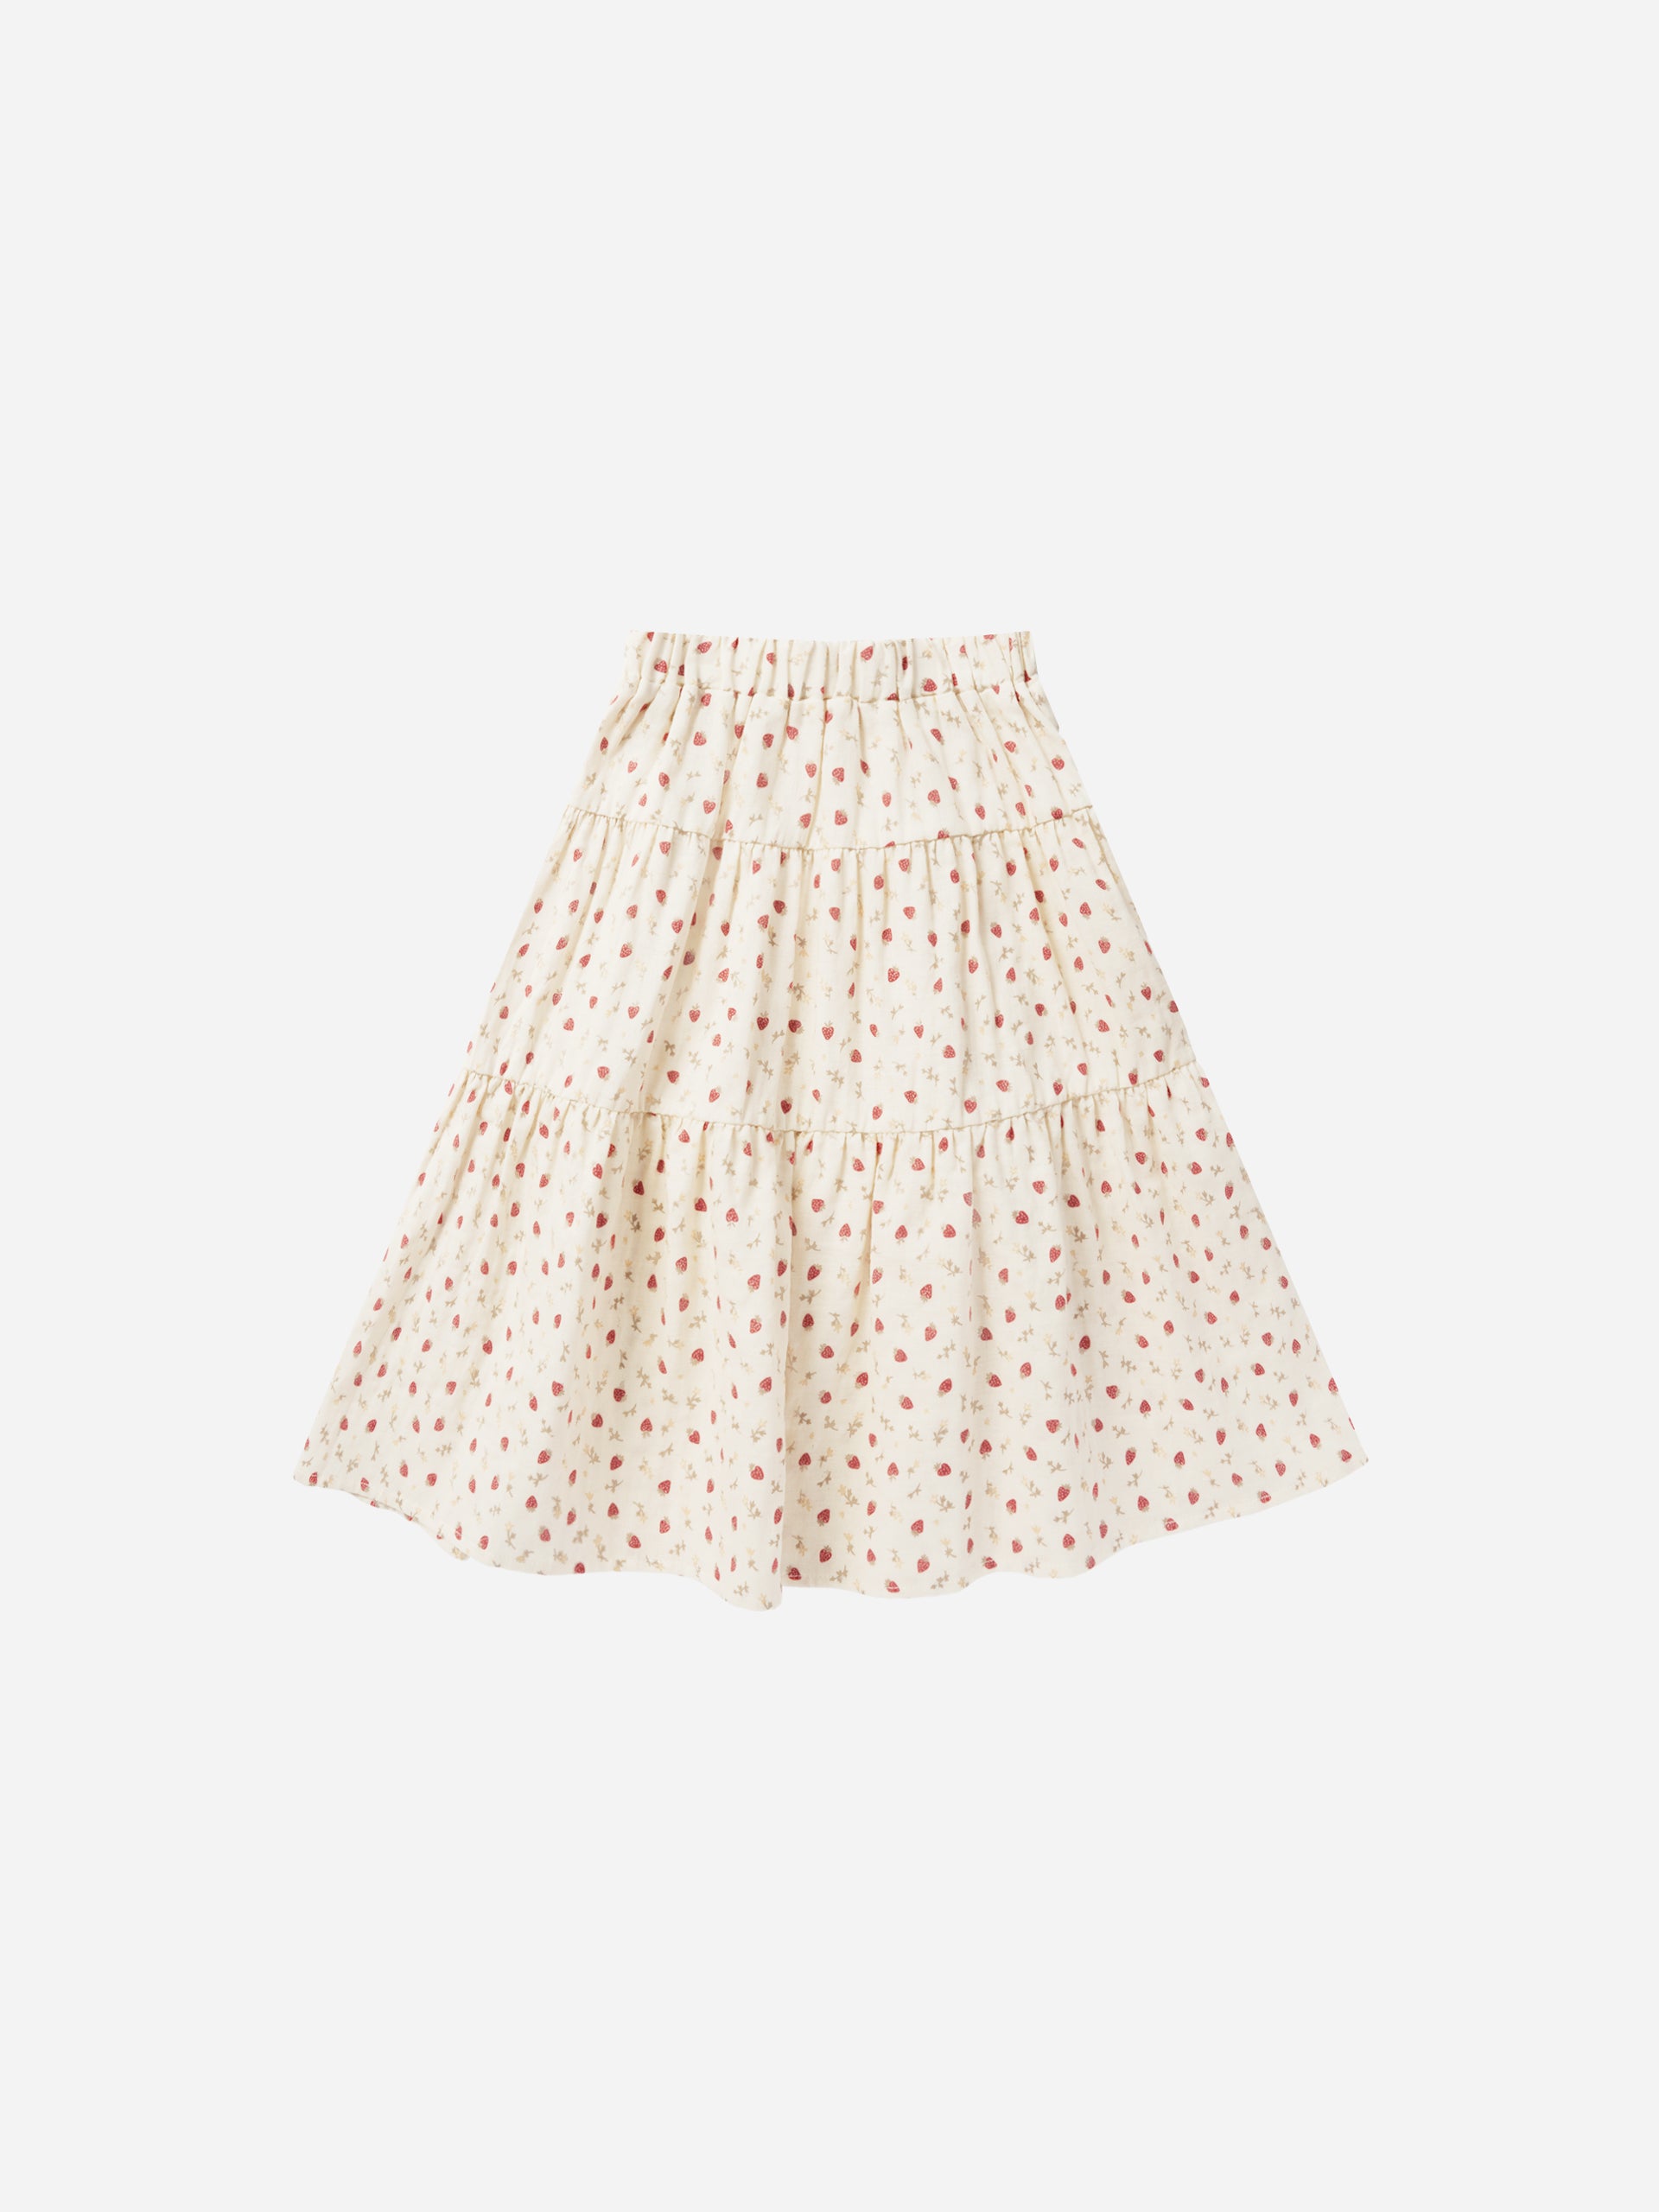 Tiered Midi Skirt || Strawberry Field - Rylee + Cru | Kids Clothes | Trendy Baby Clothes | Modern Infant Outfits |